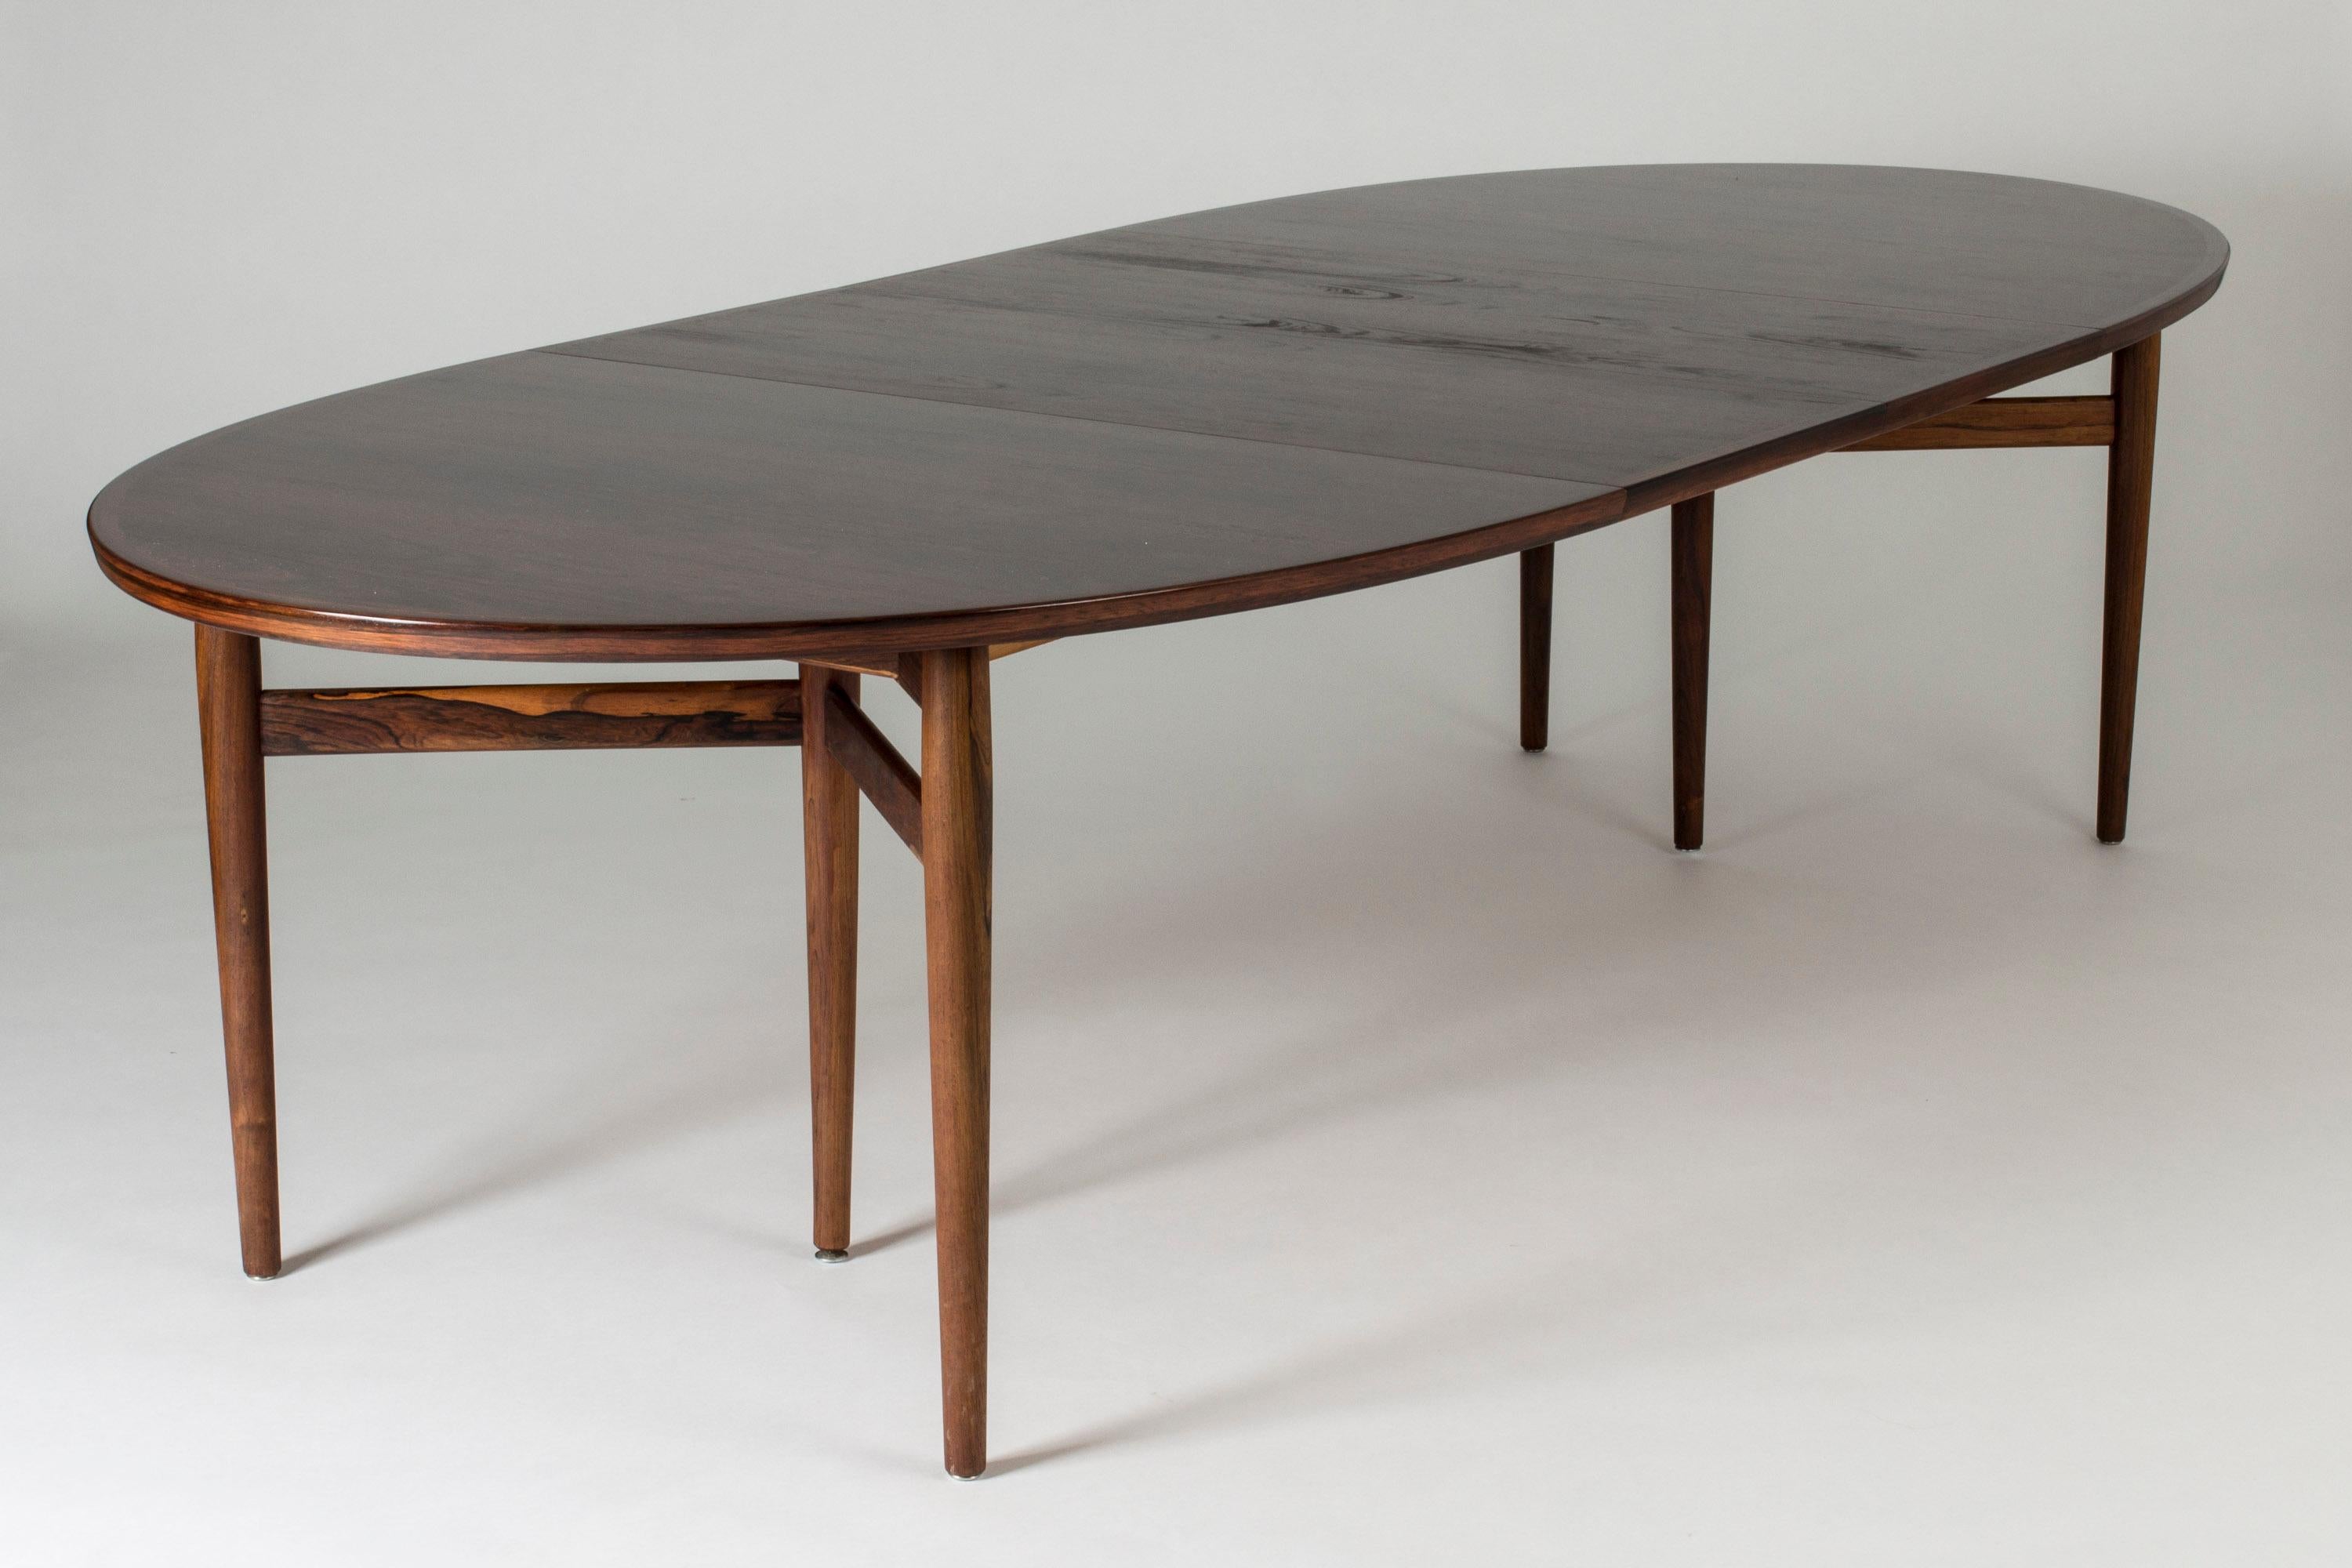 Danish Oval Dining Table with Extension Leaves by Arne Vodder